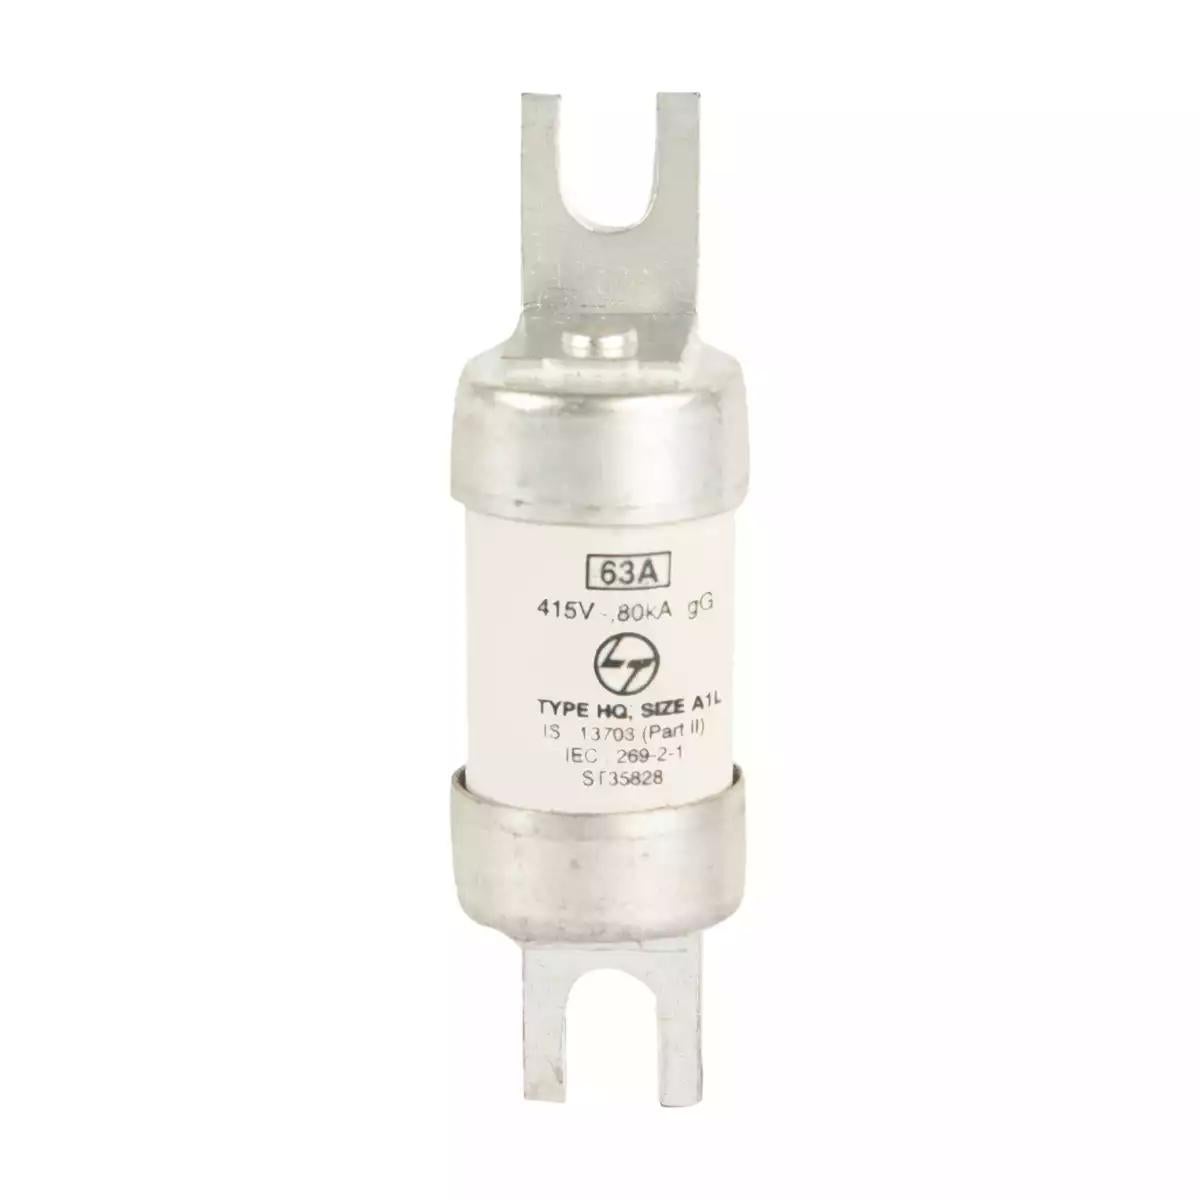 HQ Bolted HRC fuse 25A 415V AC Size A1L